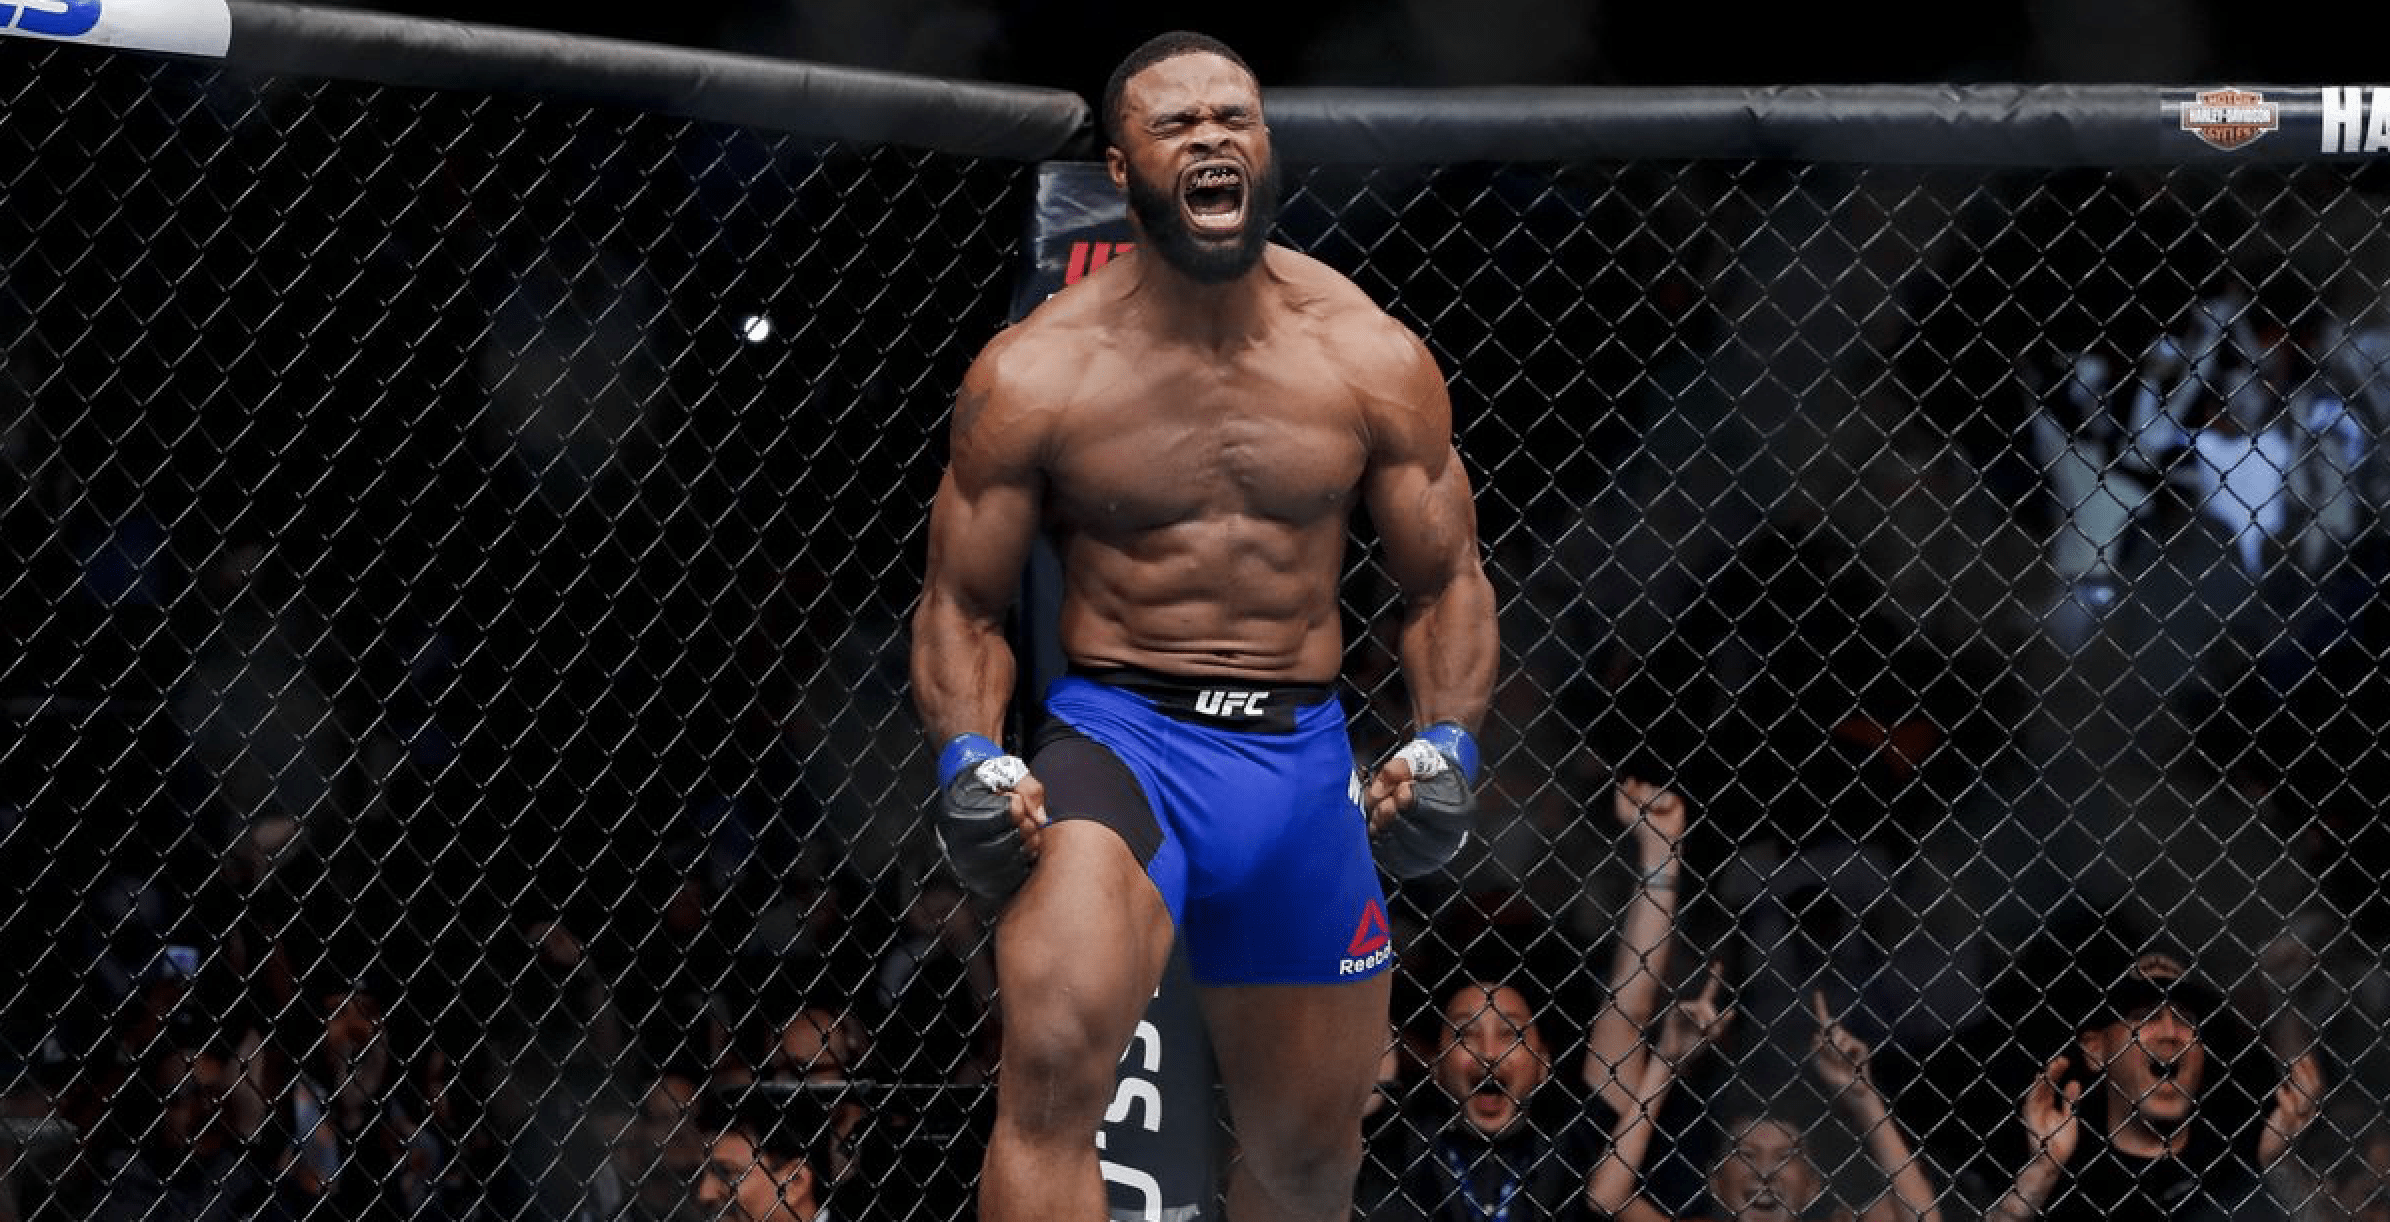 UFC – Tyron Woodley To Israel Adesanya: I Want To Knock Your Block Off